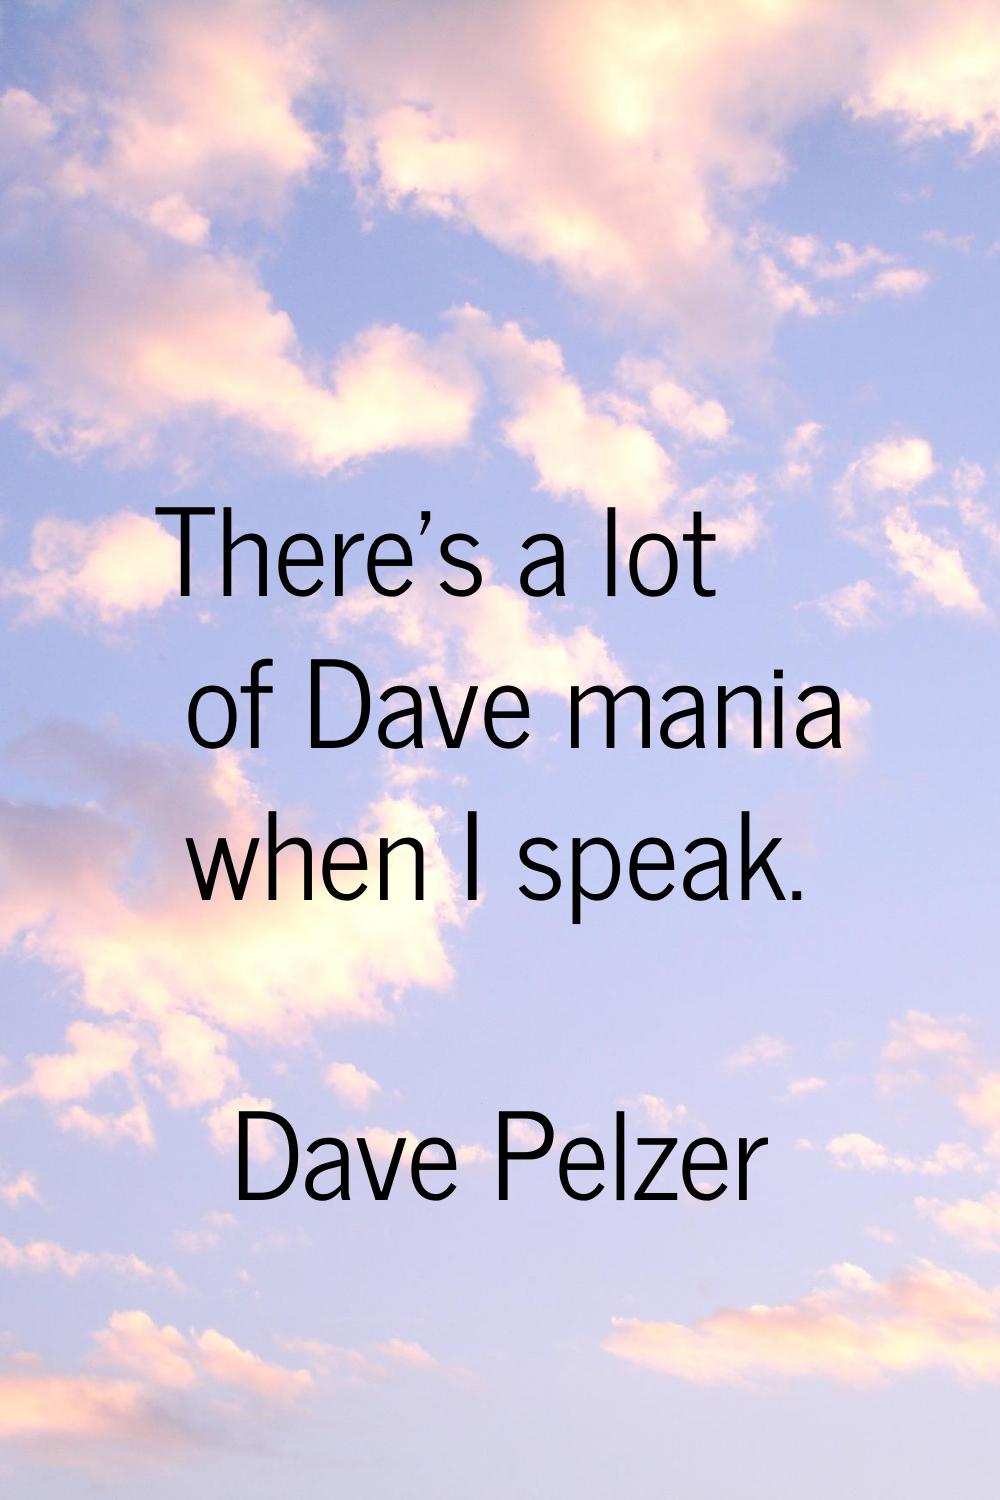 There's a lot of Dave mania when I speak.